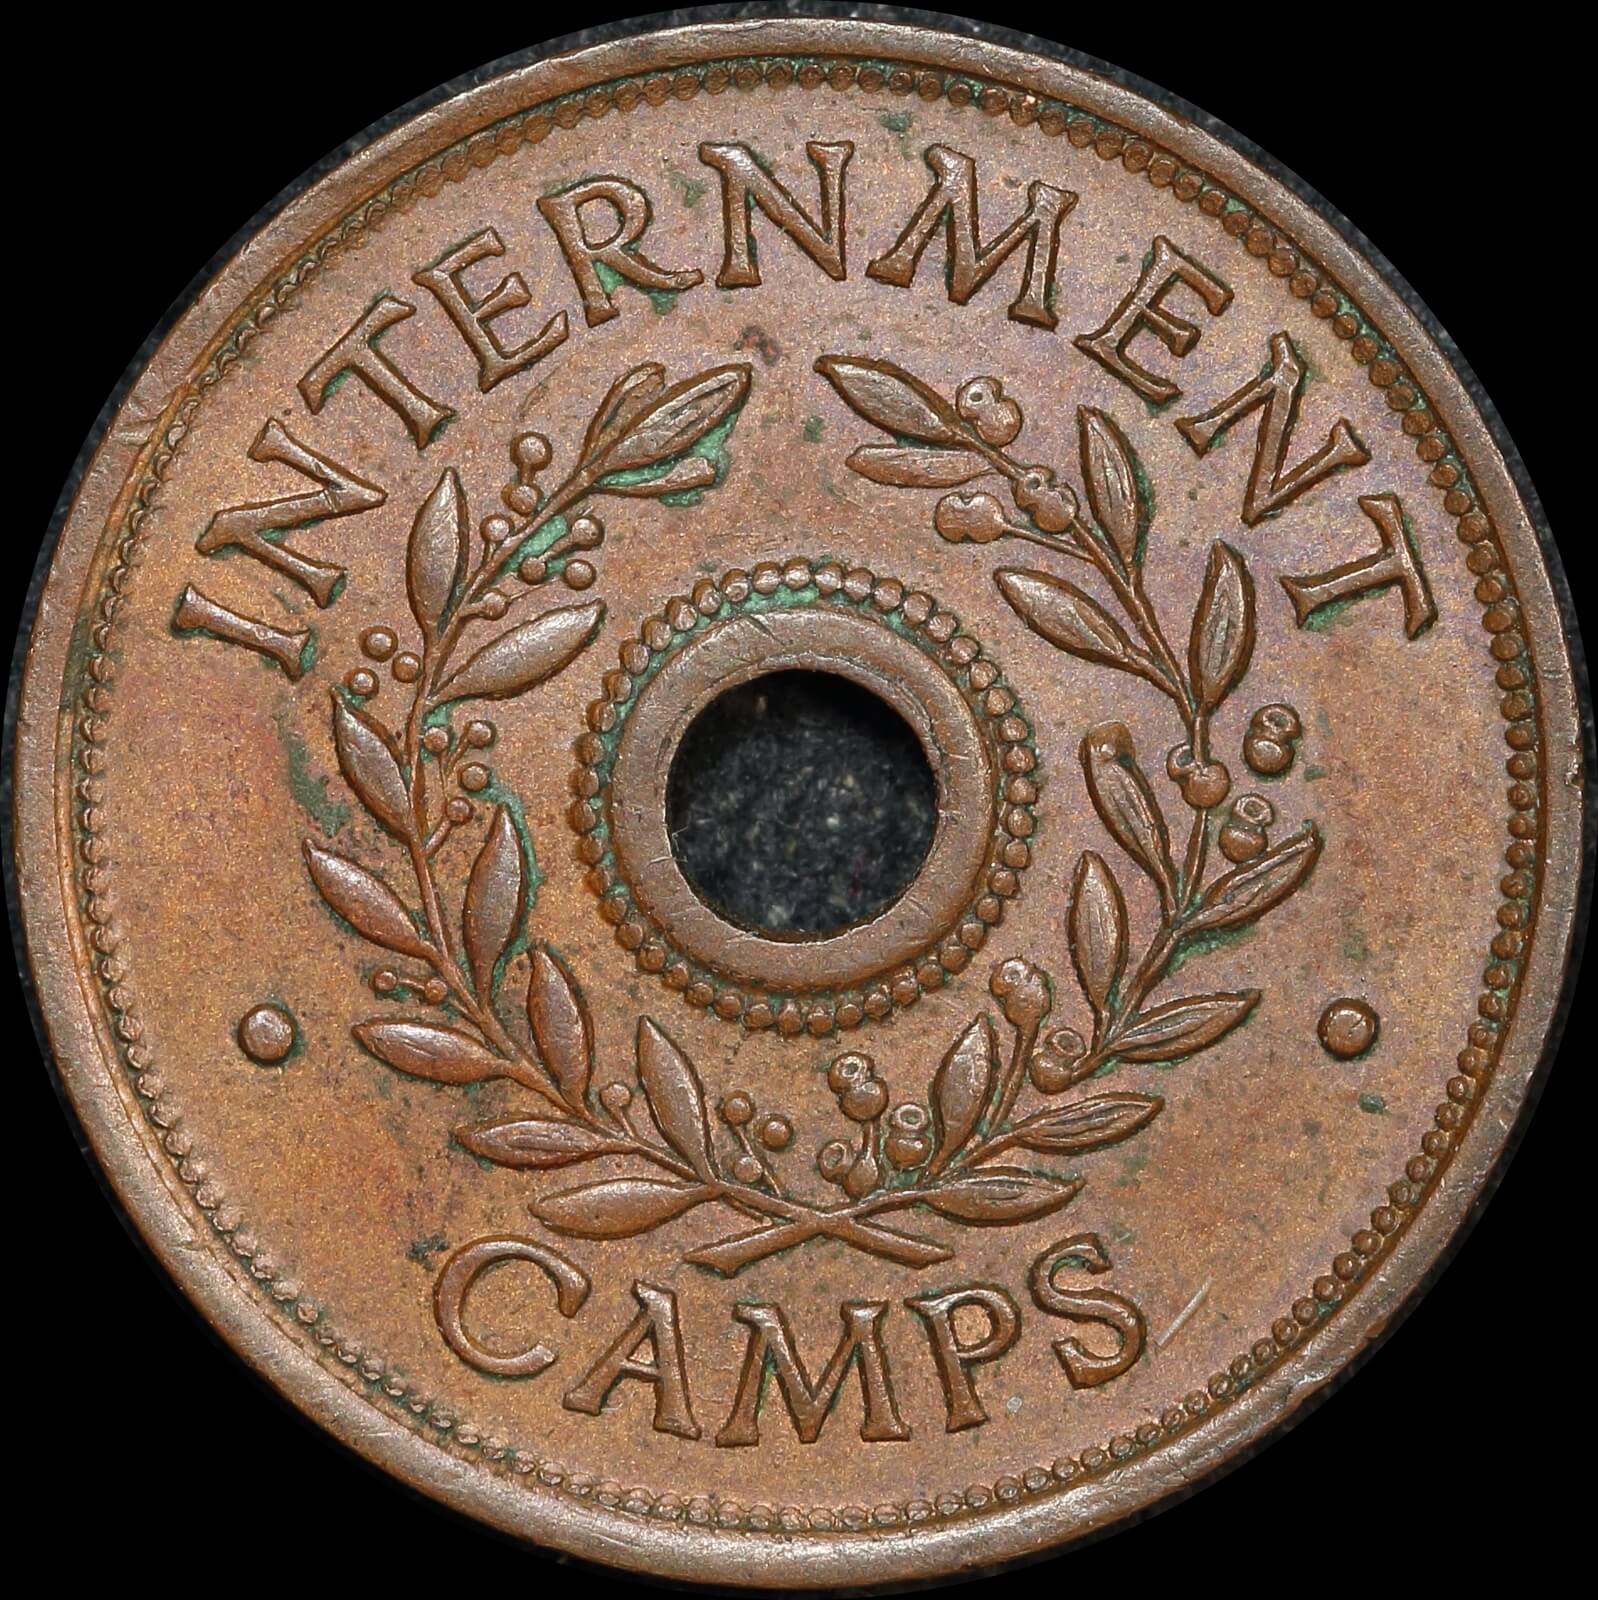 1942 One Shilling Token C. WWII Hay Internment Camp 7 about Unc product image